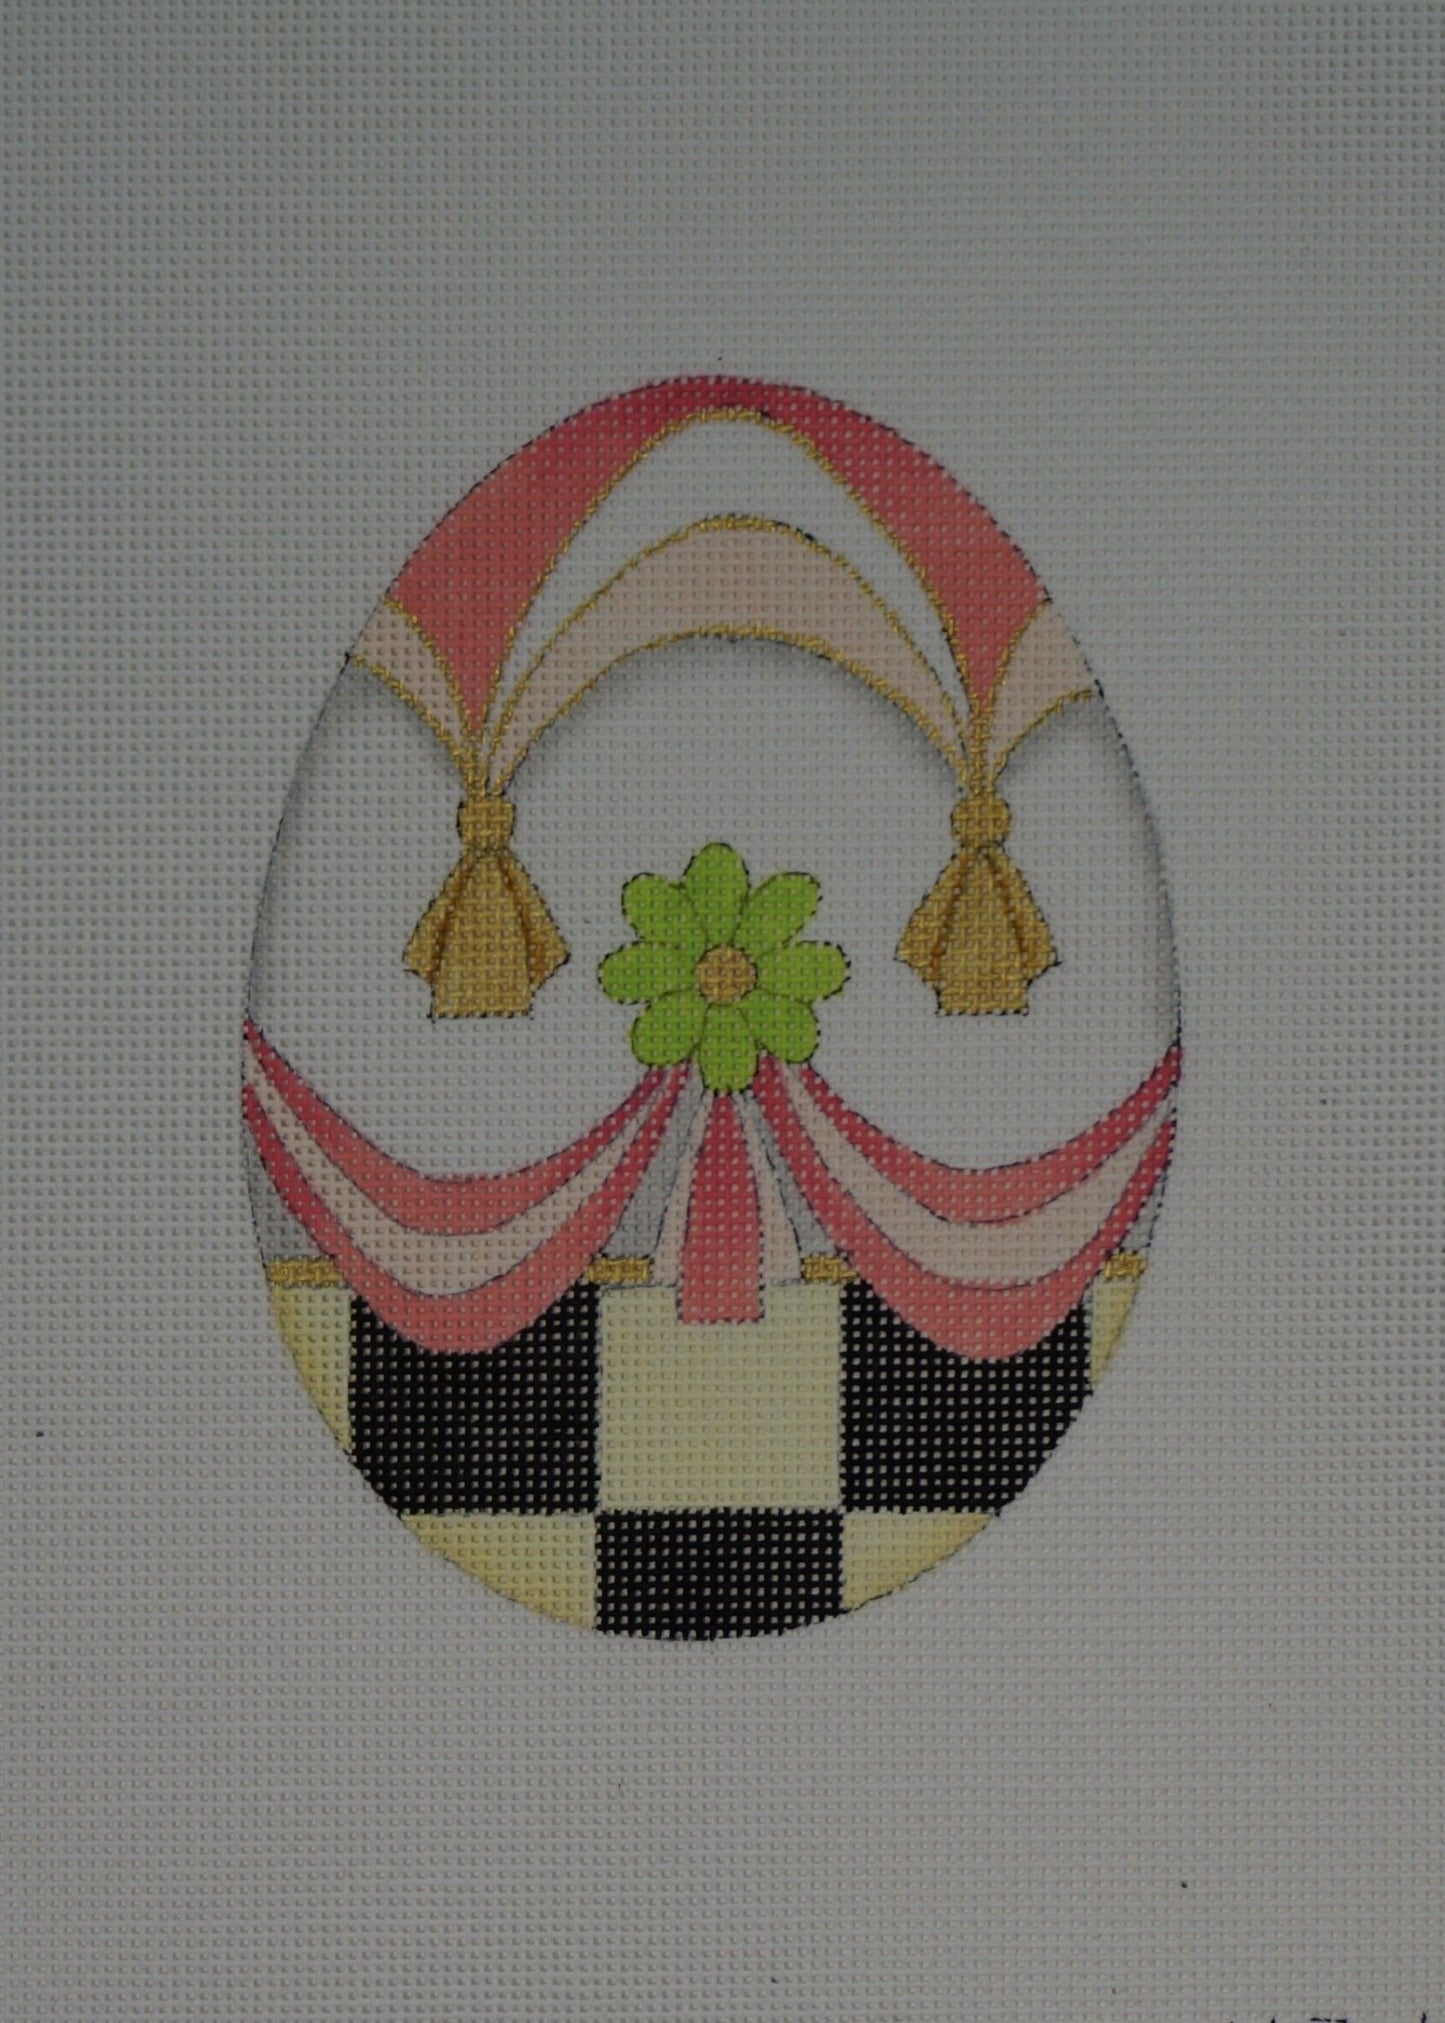 5 Inch Checkered Egg - The Flying Needles